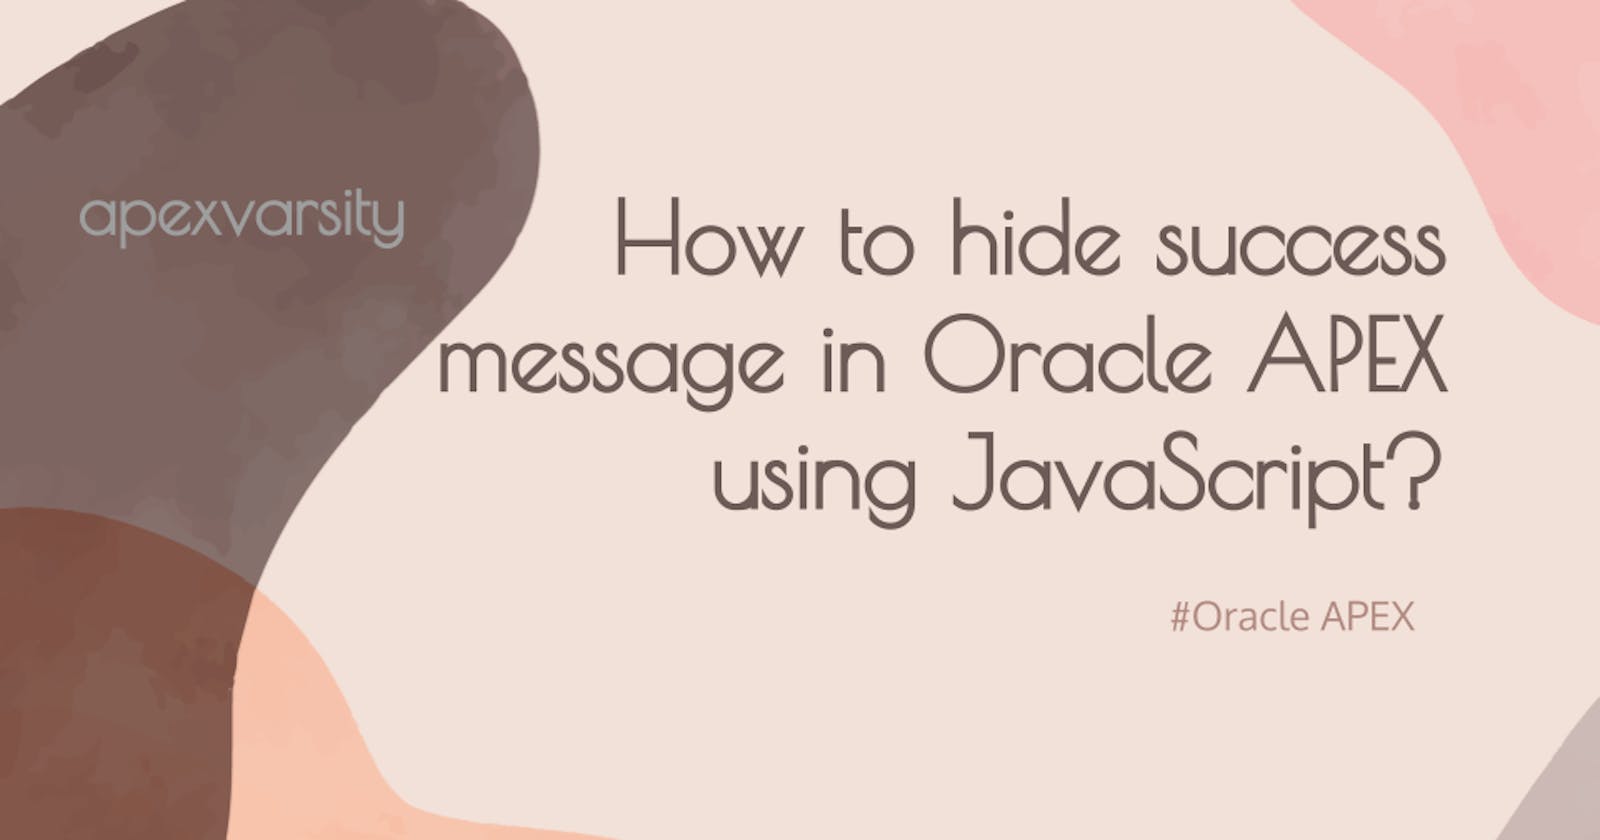 How to hide the Oracle APEX success message using JavaScript